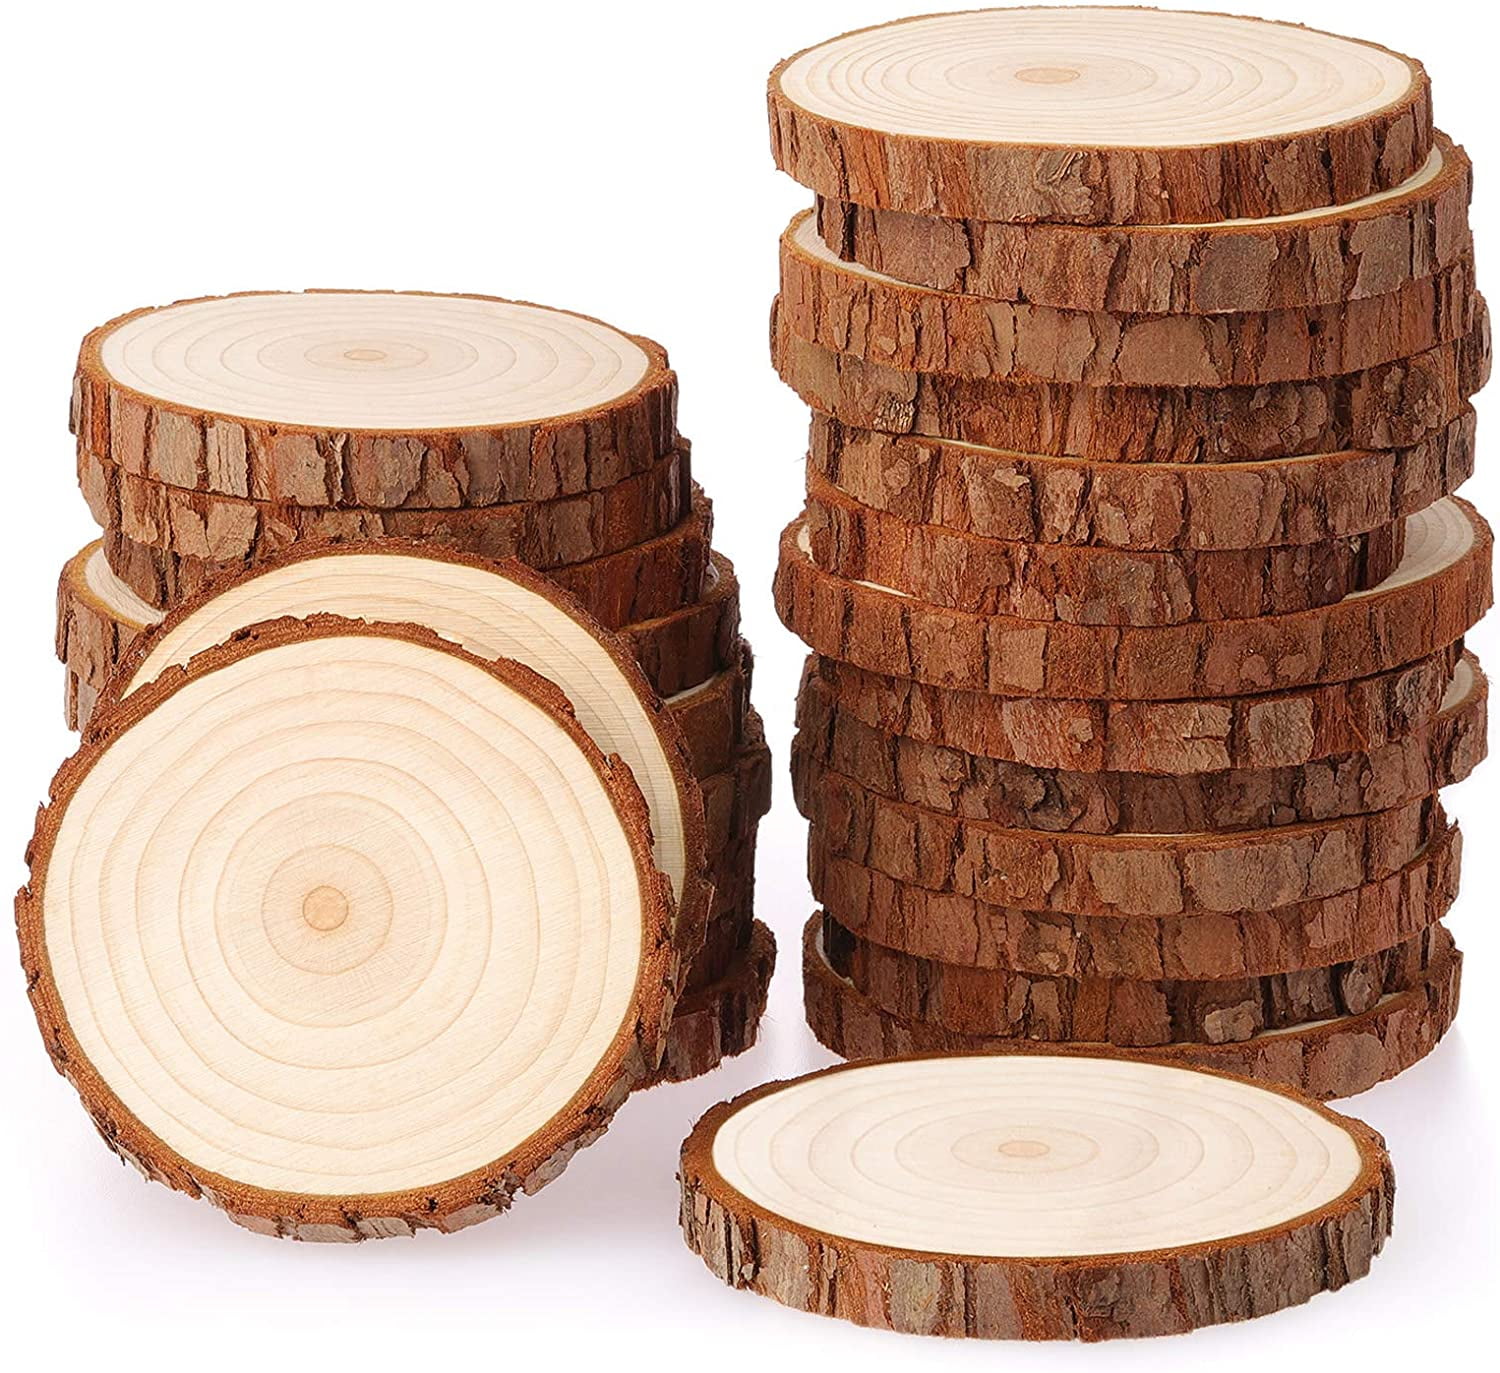 Fuyit Natural Wood Slices 25 Pcs 3.1-3.5 inches Unfinished Wood Craft Kit  Wood Circles